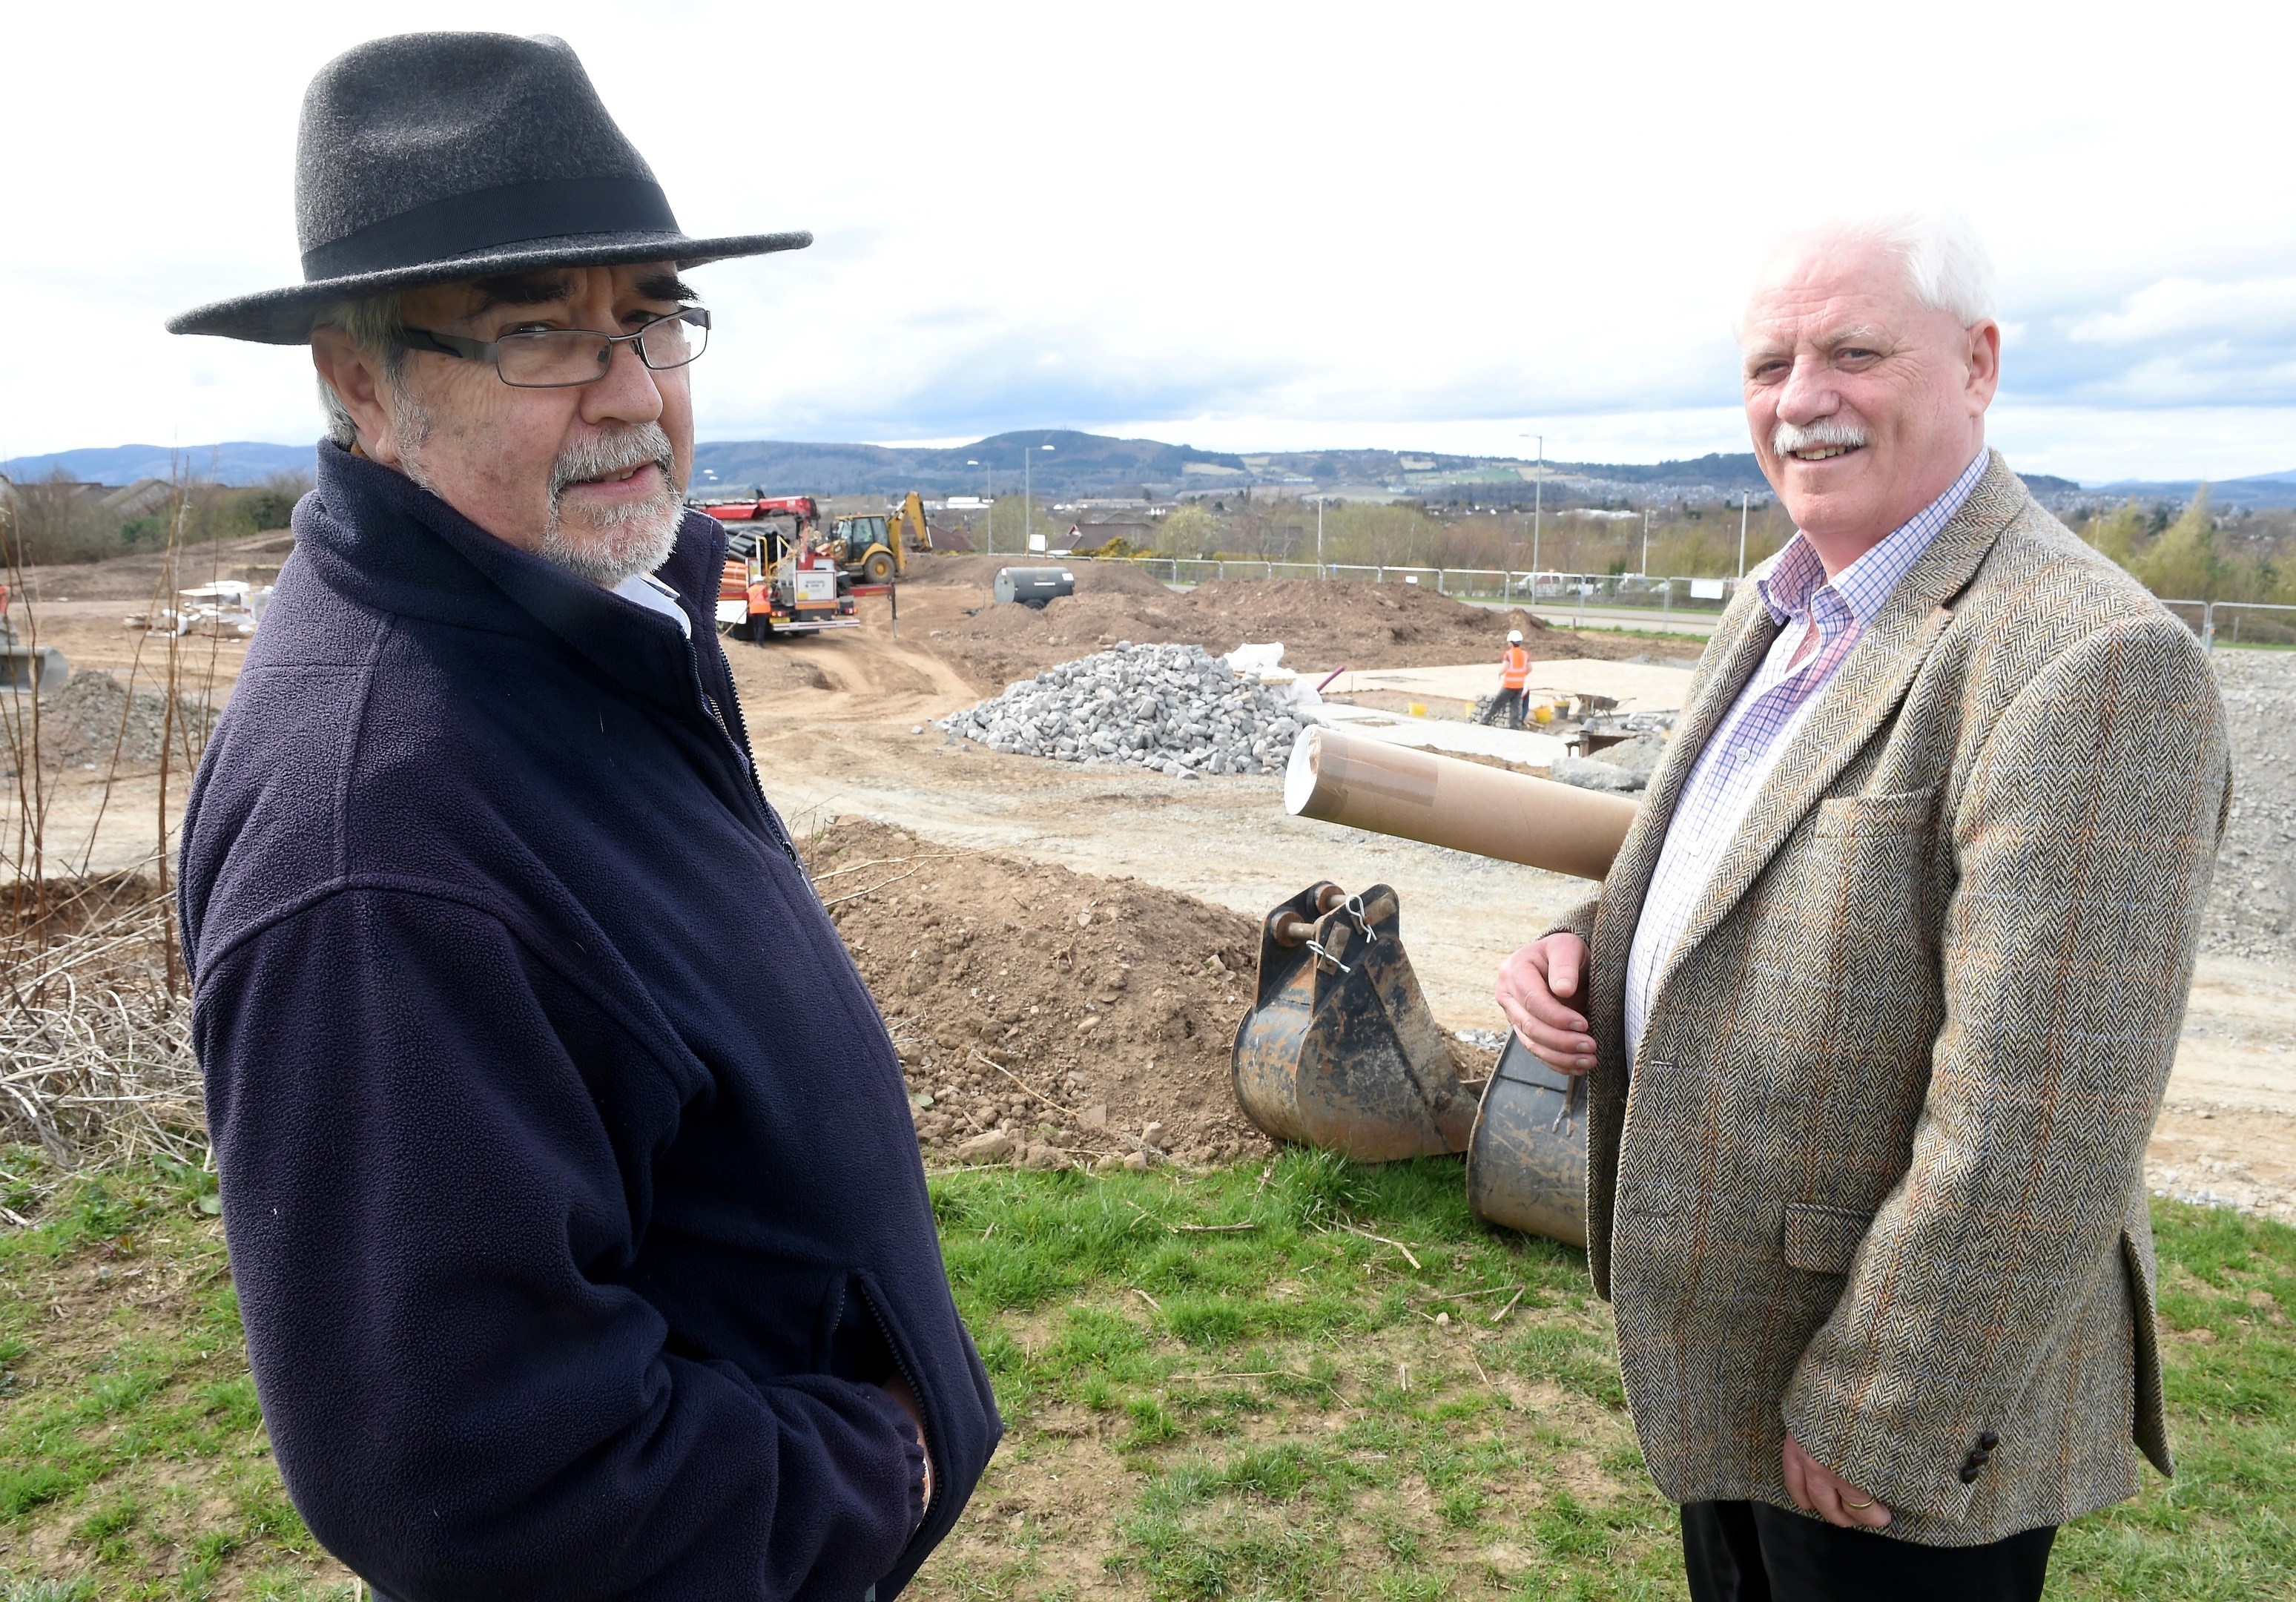 Thomas Prag (left) with Alan Jones, advisor to the Inshes Community Association for the design and building of their skate park in Inverness.